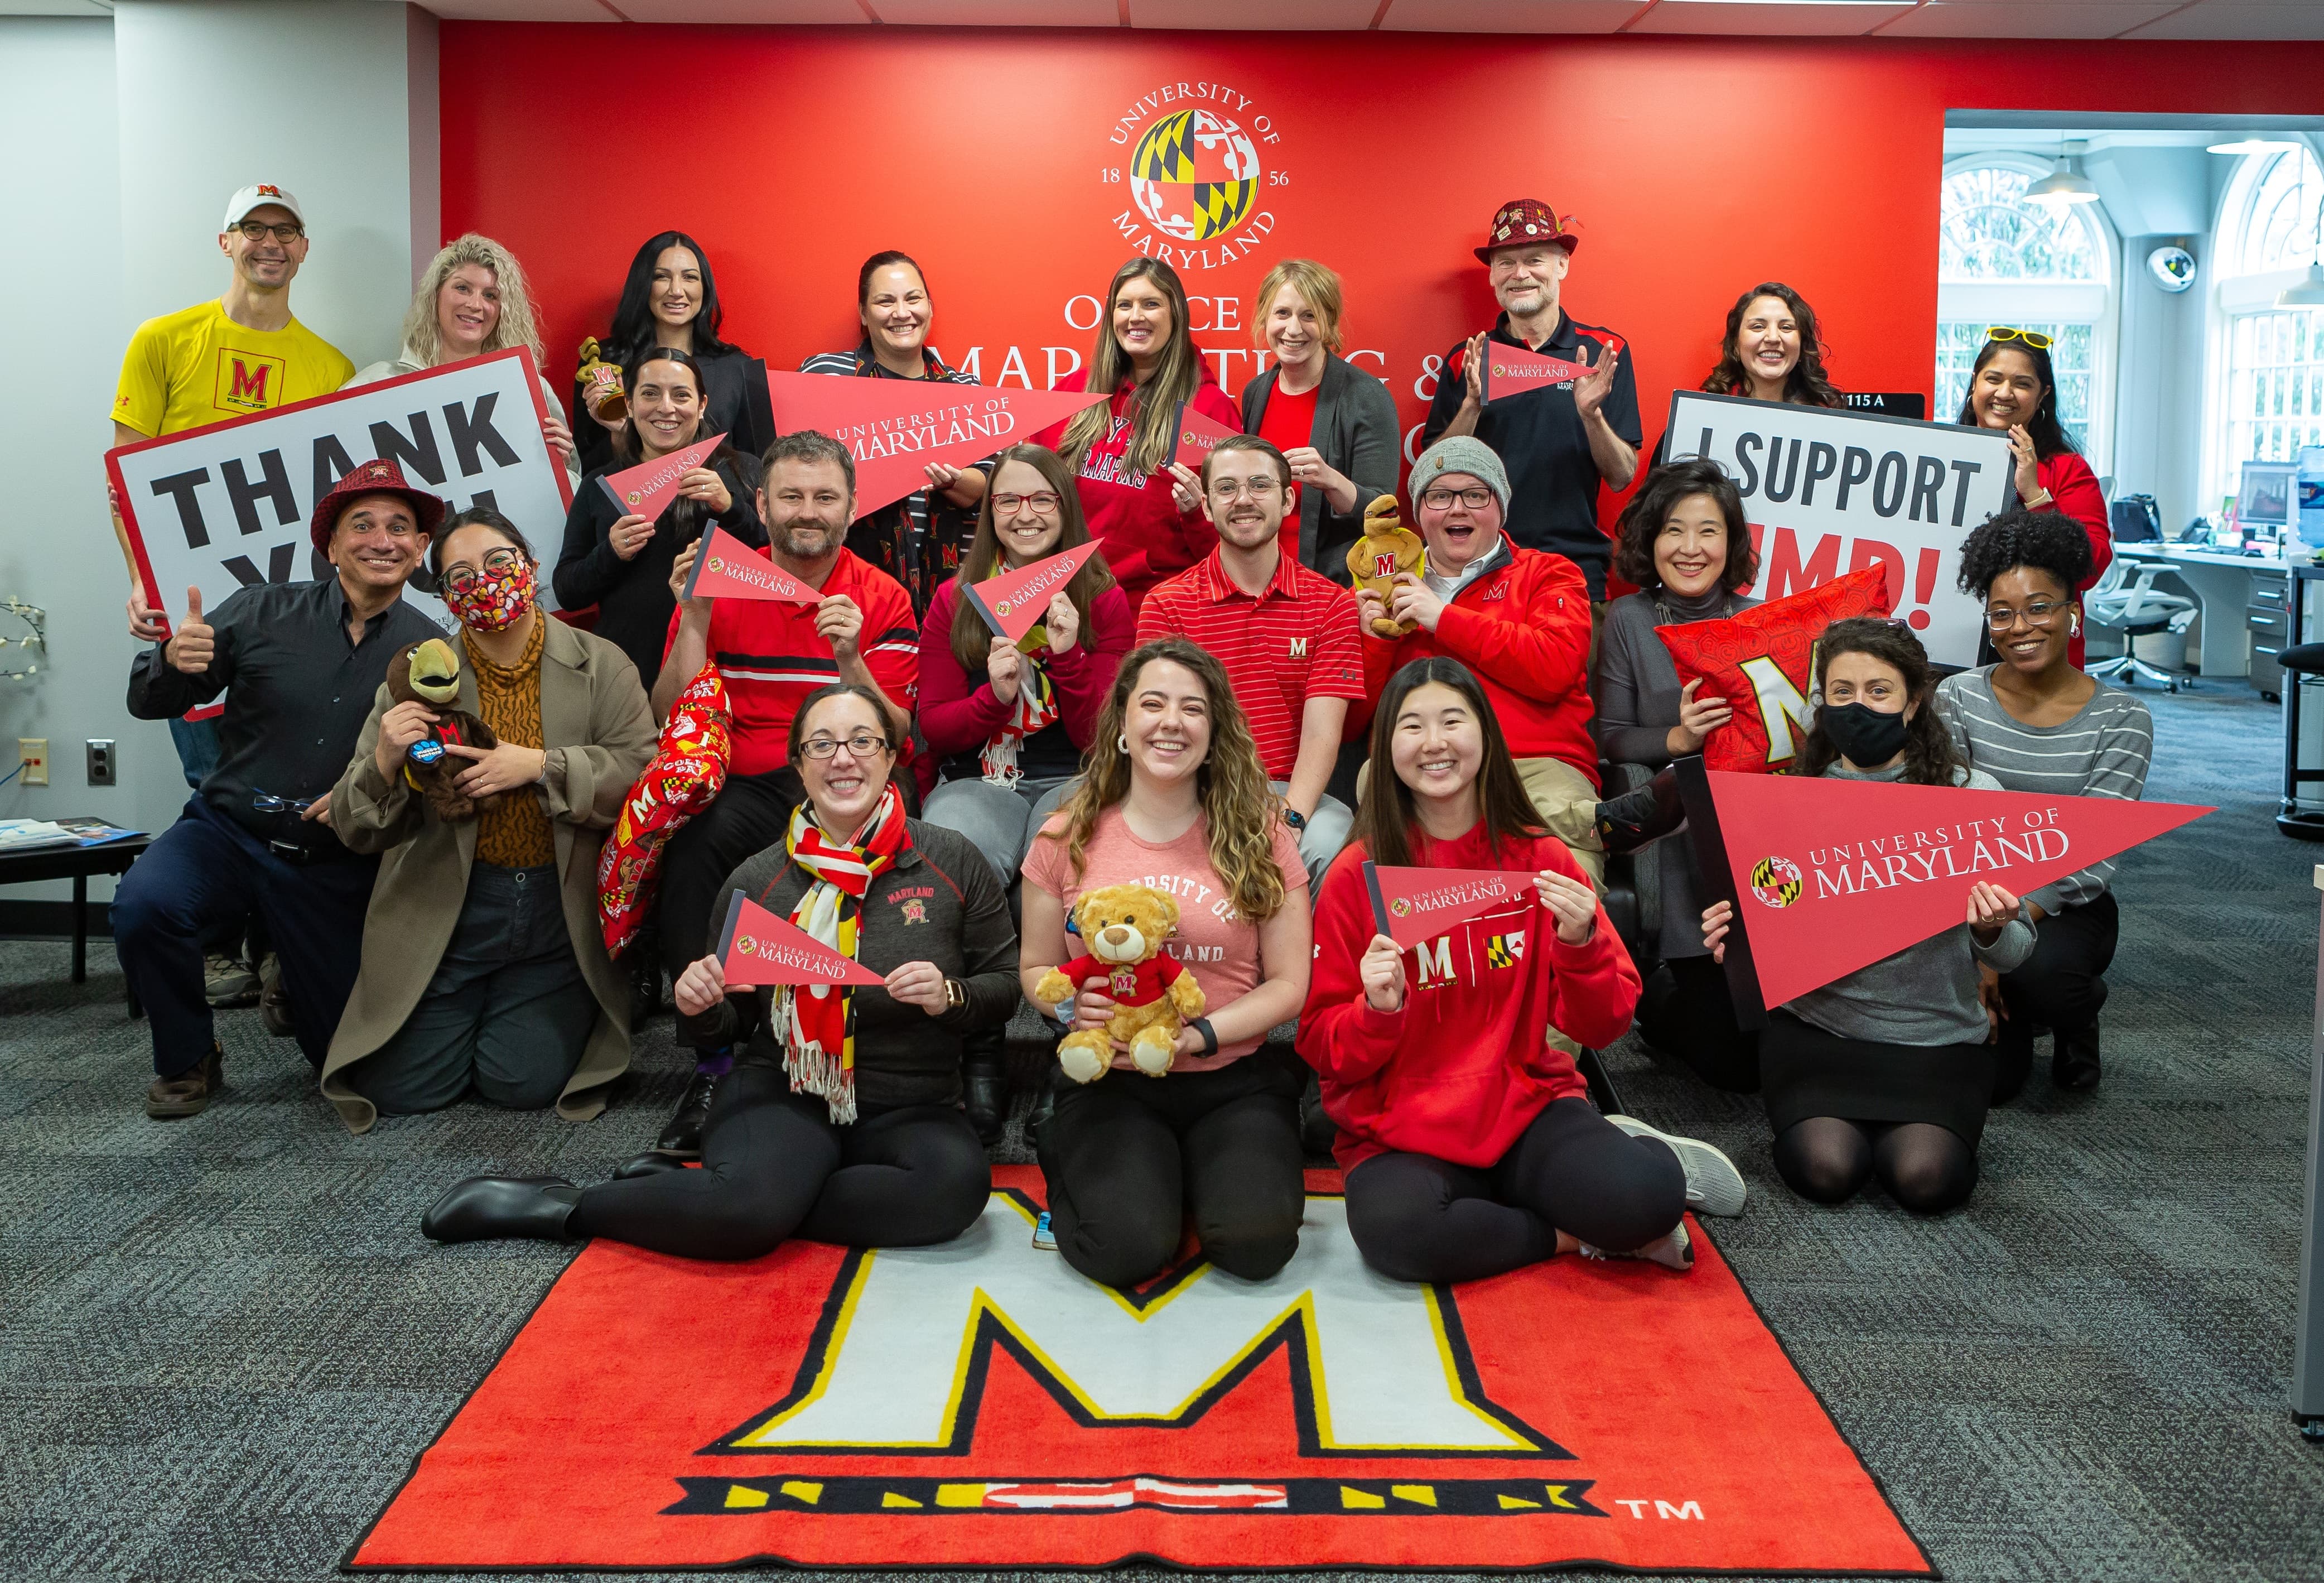 Some of the staff of the University of Maryland's Office of Marketing and Communication